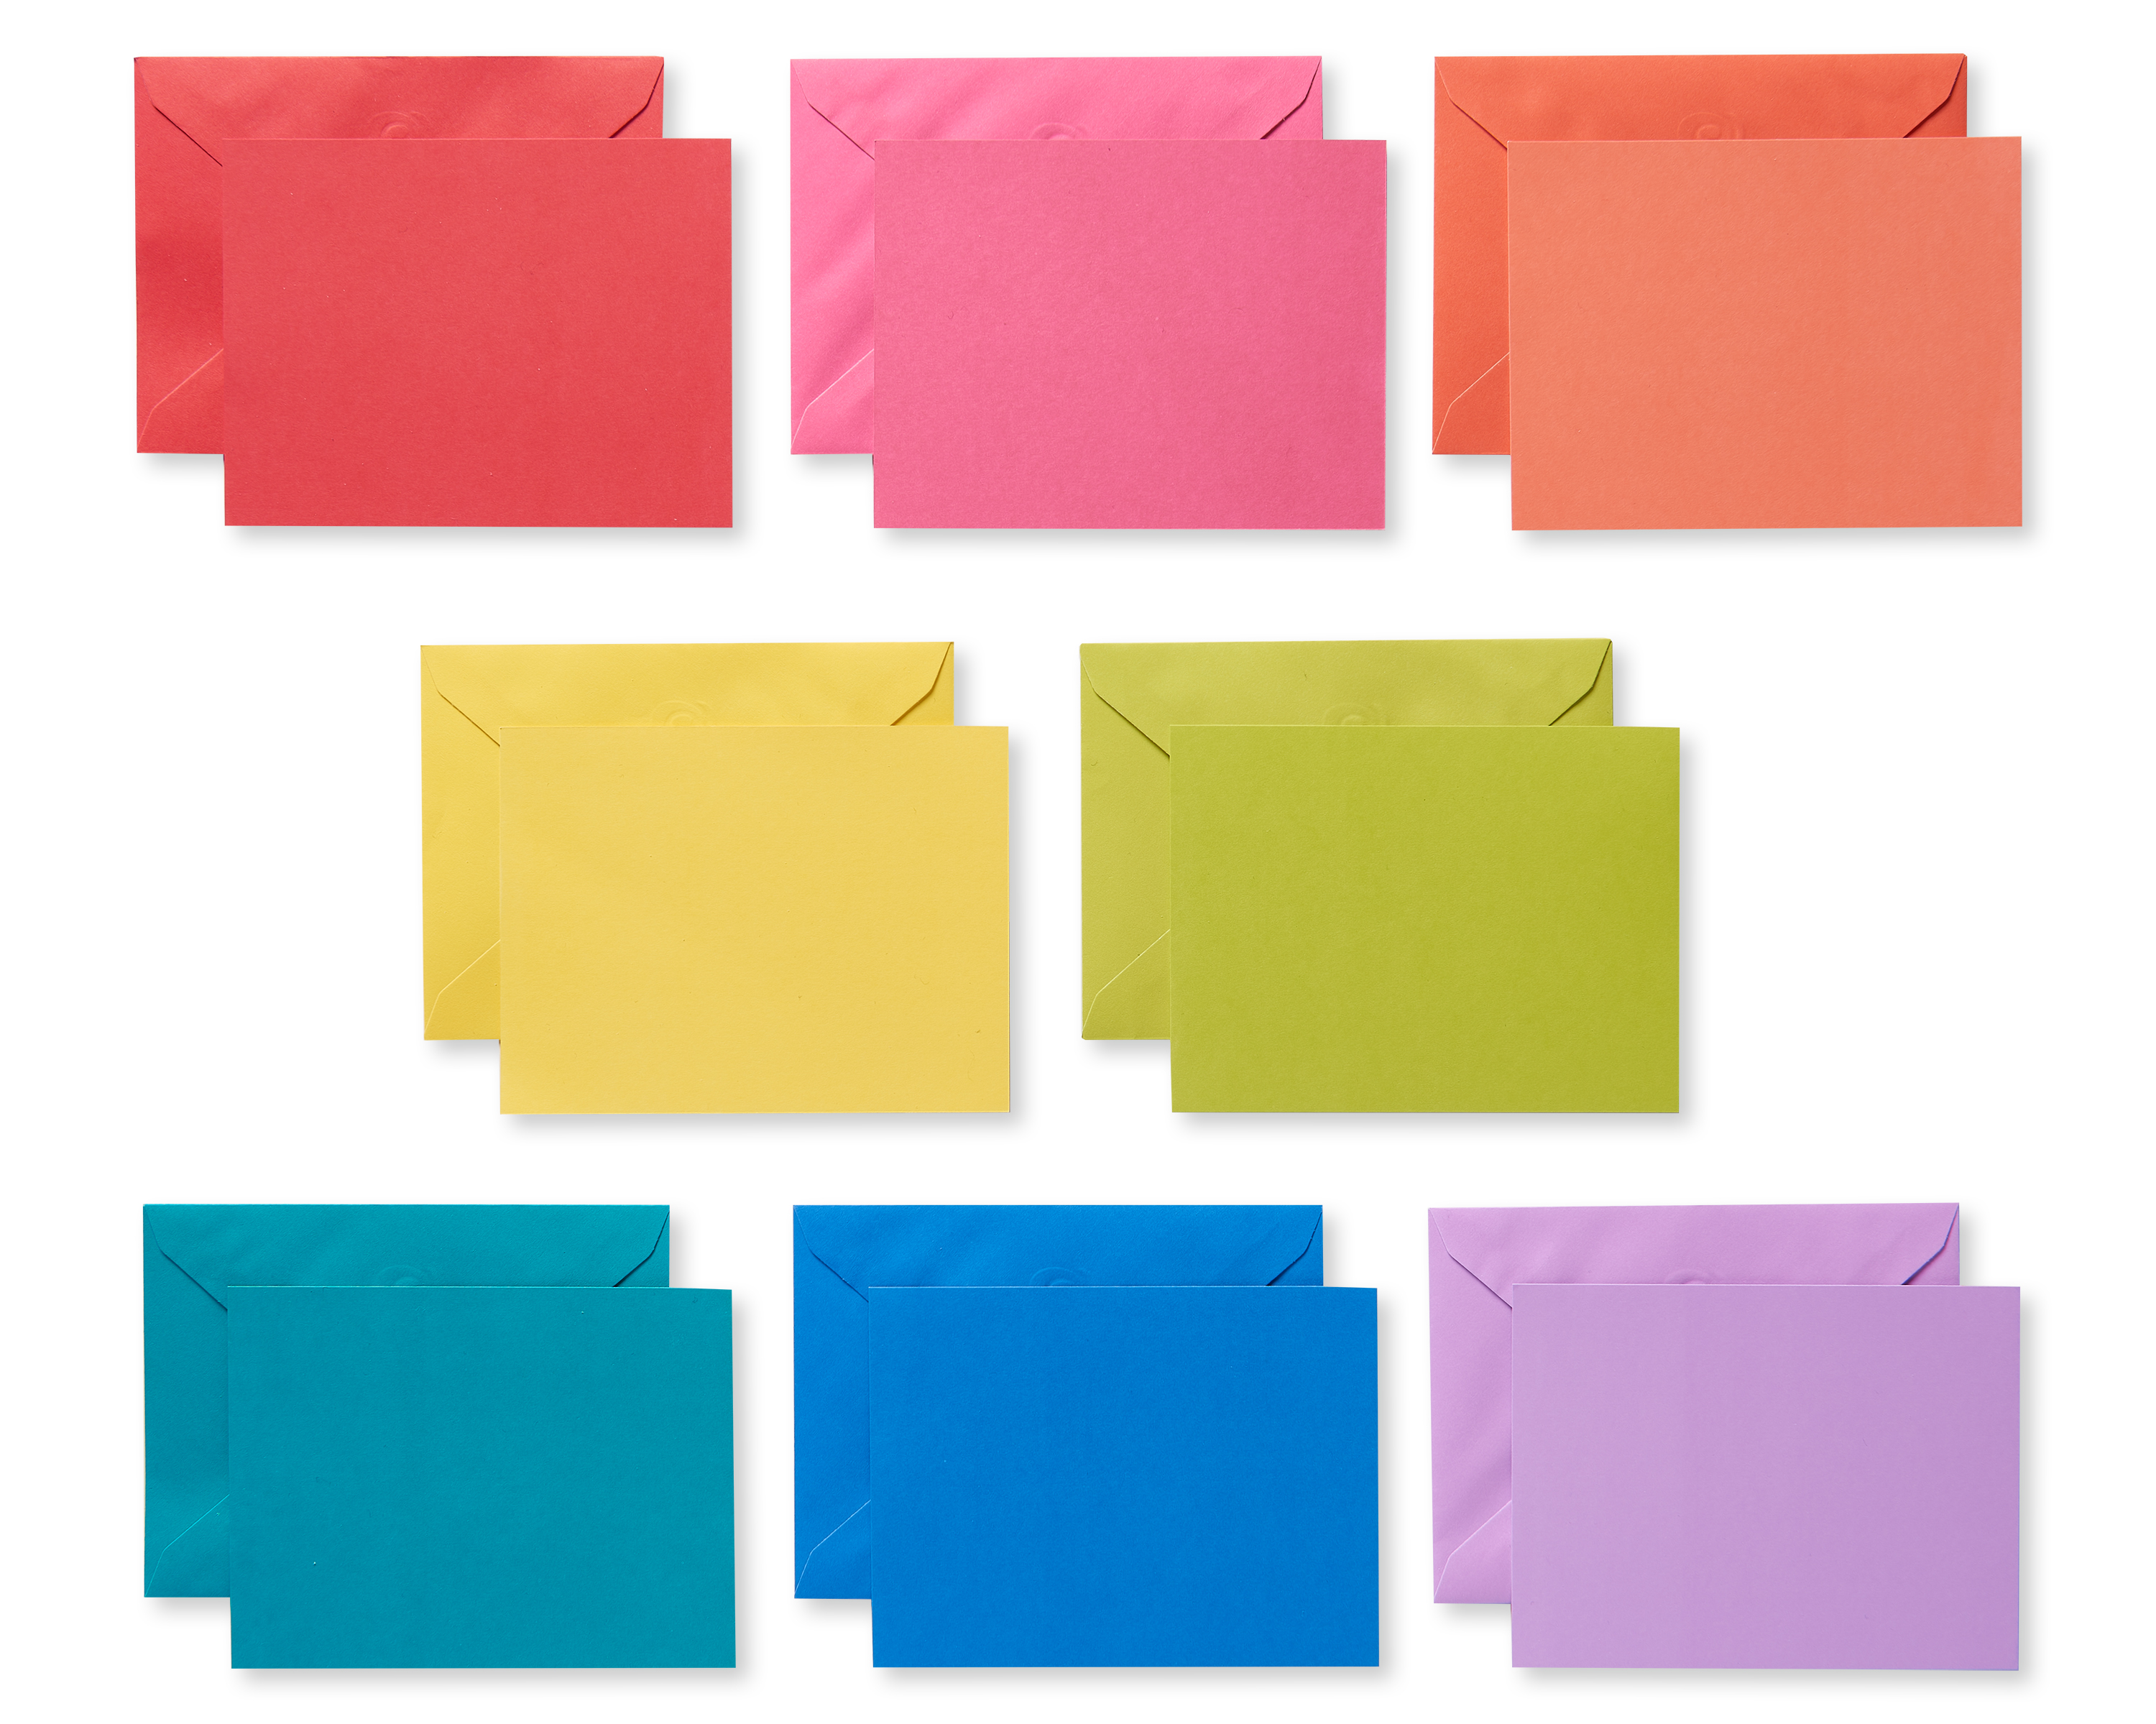 American Greetings Rainbow Single Panel Blank Cards and Colored Envelopes,  200-Count, 5.25 x 4